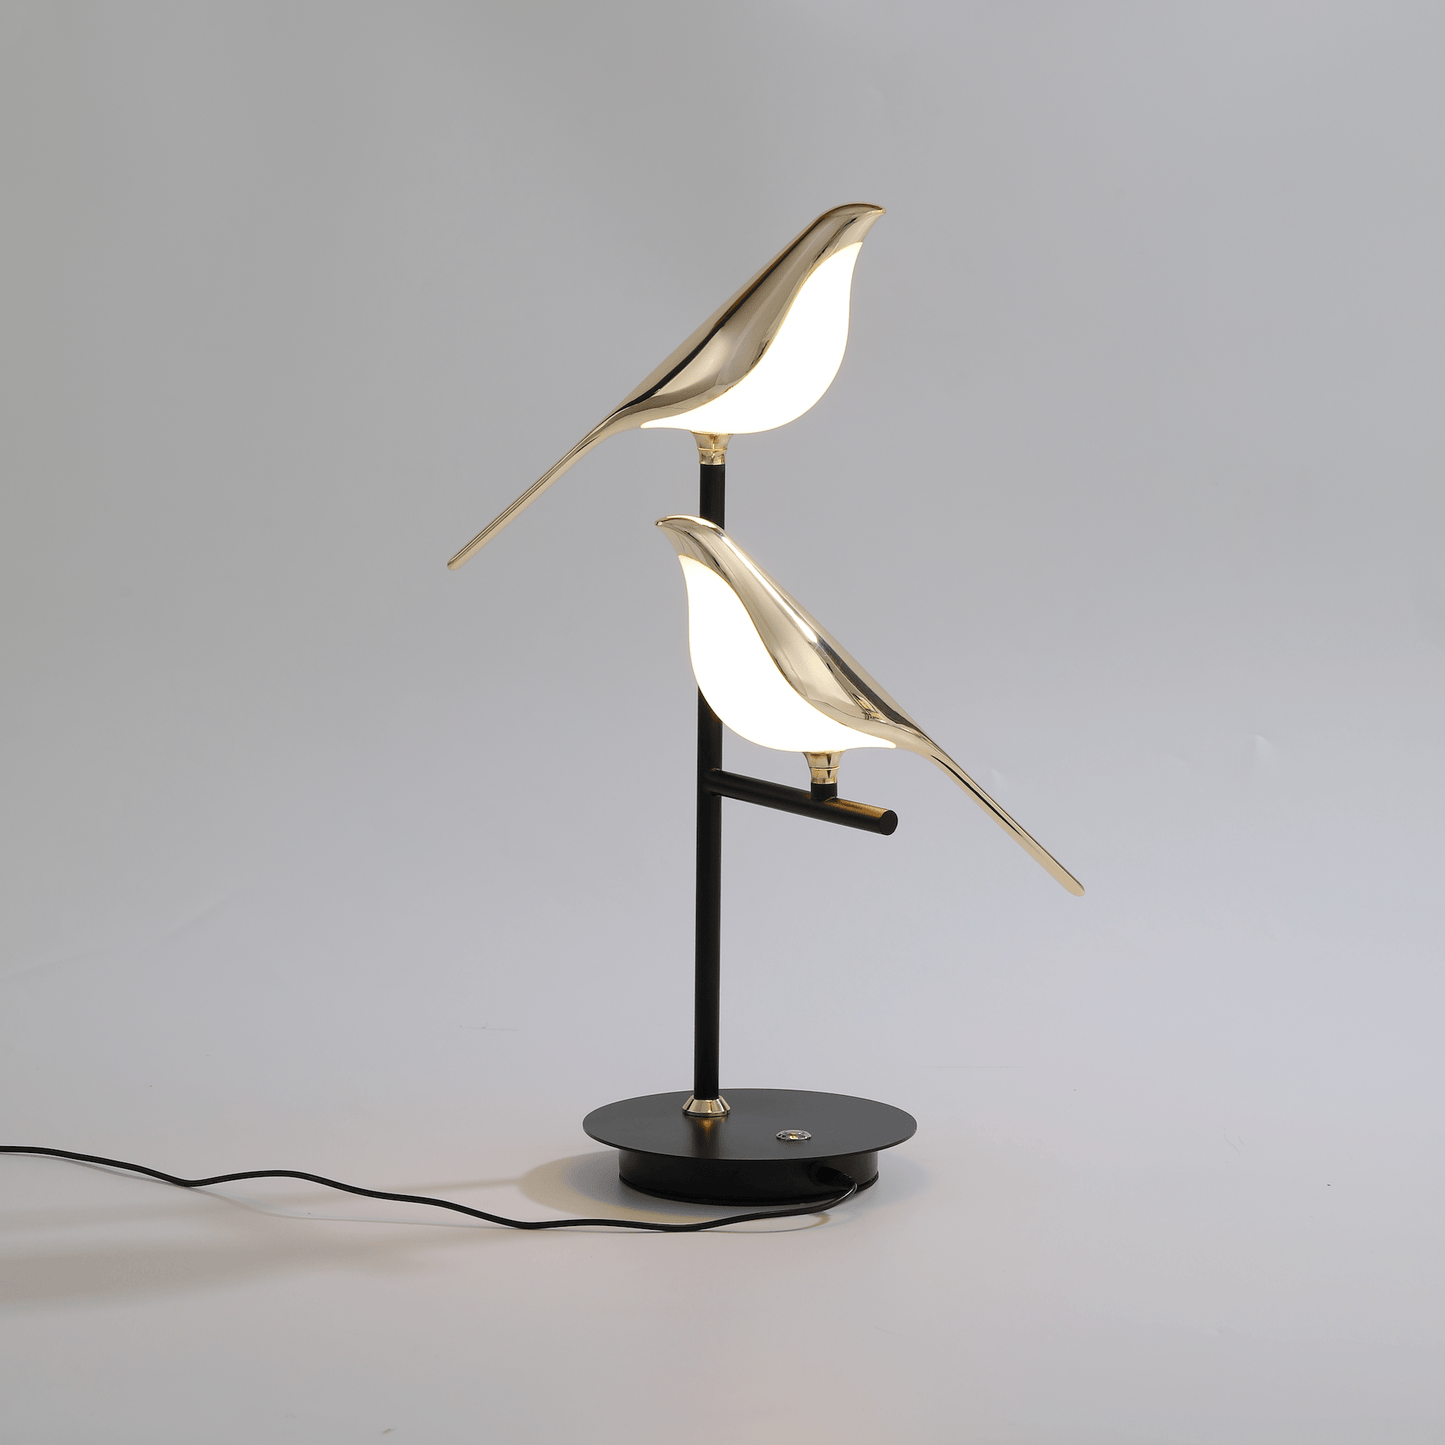 Lilac Breasted Lamp